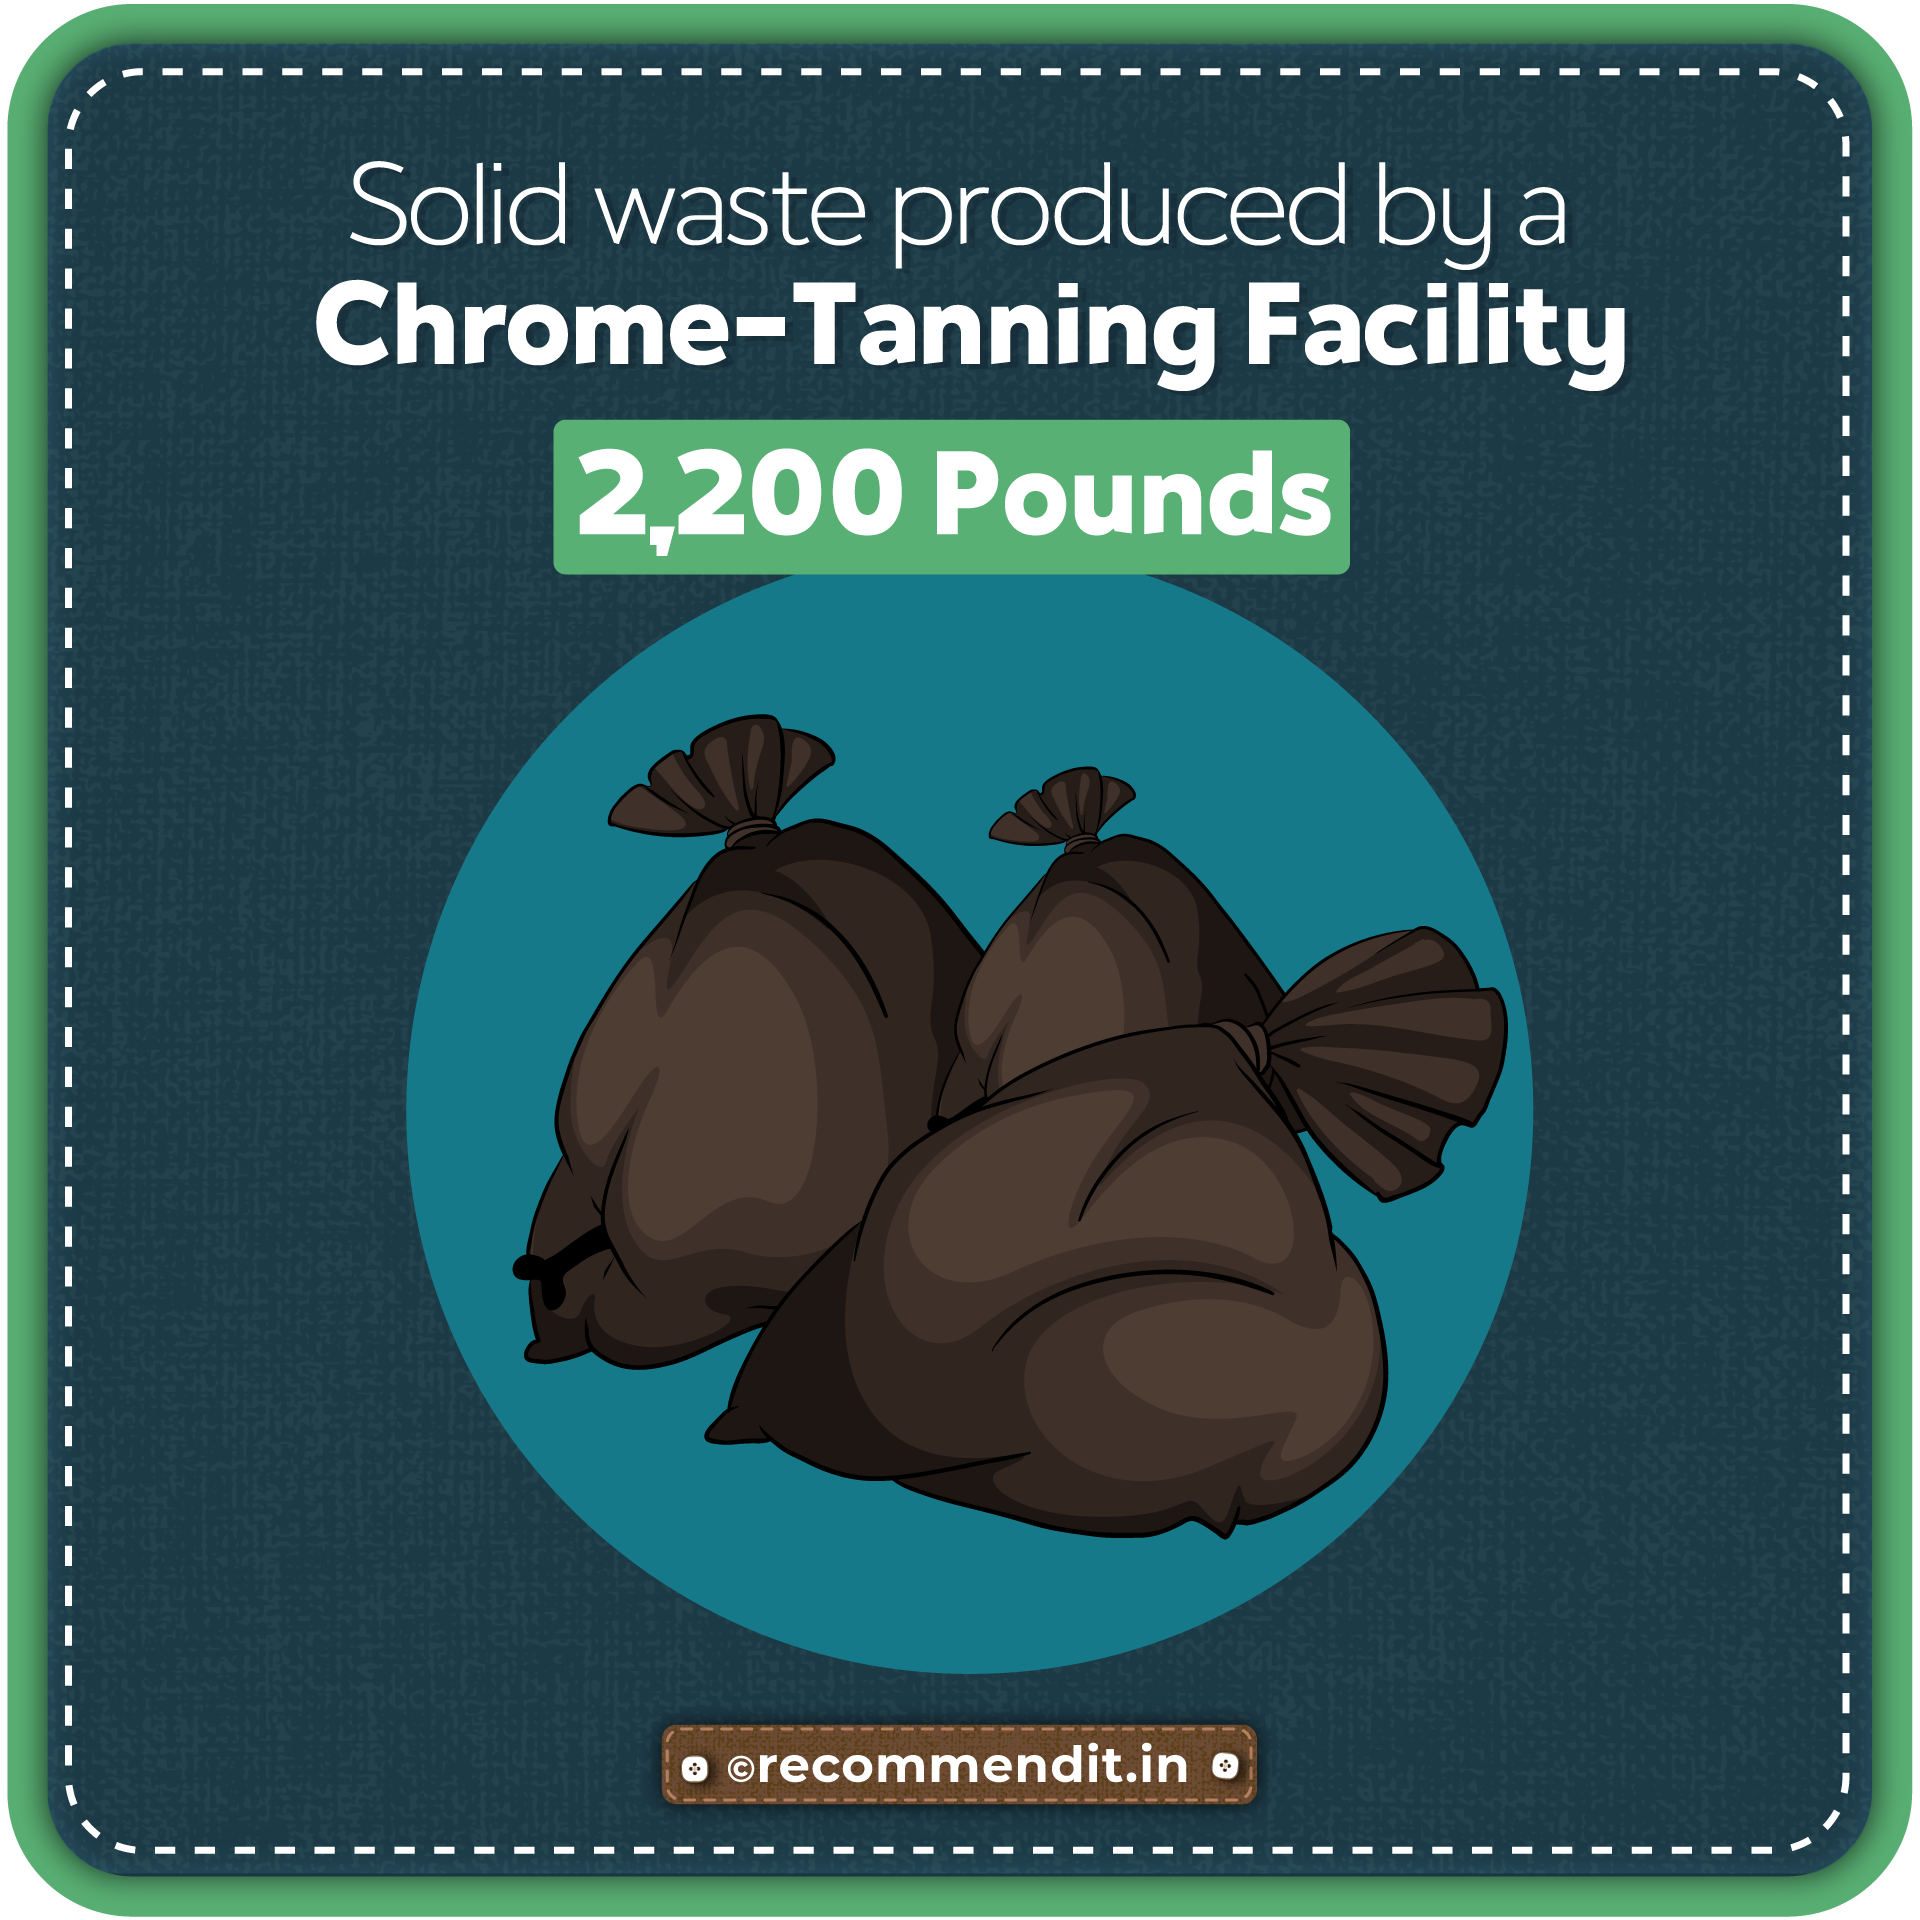 Solid waste produced by a Chrome-tanning facility